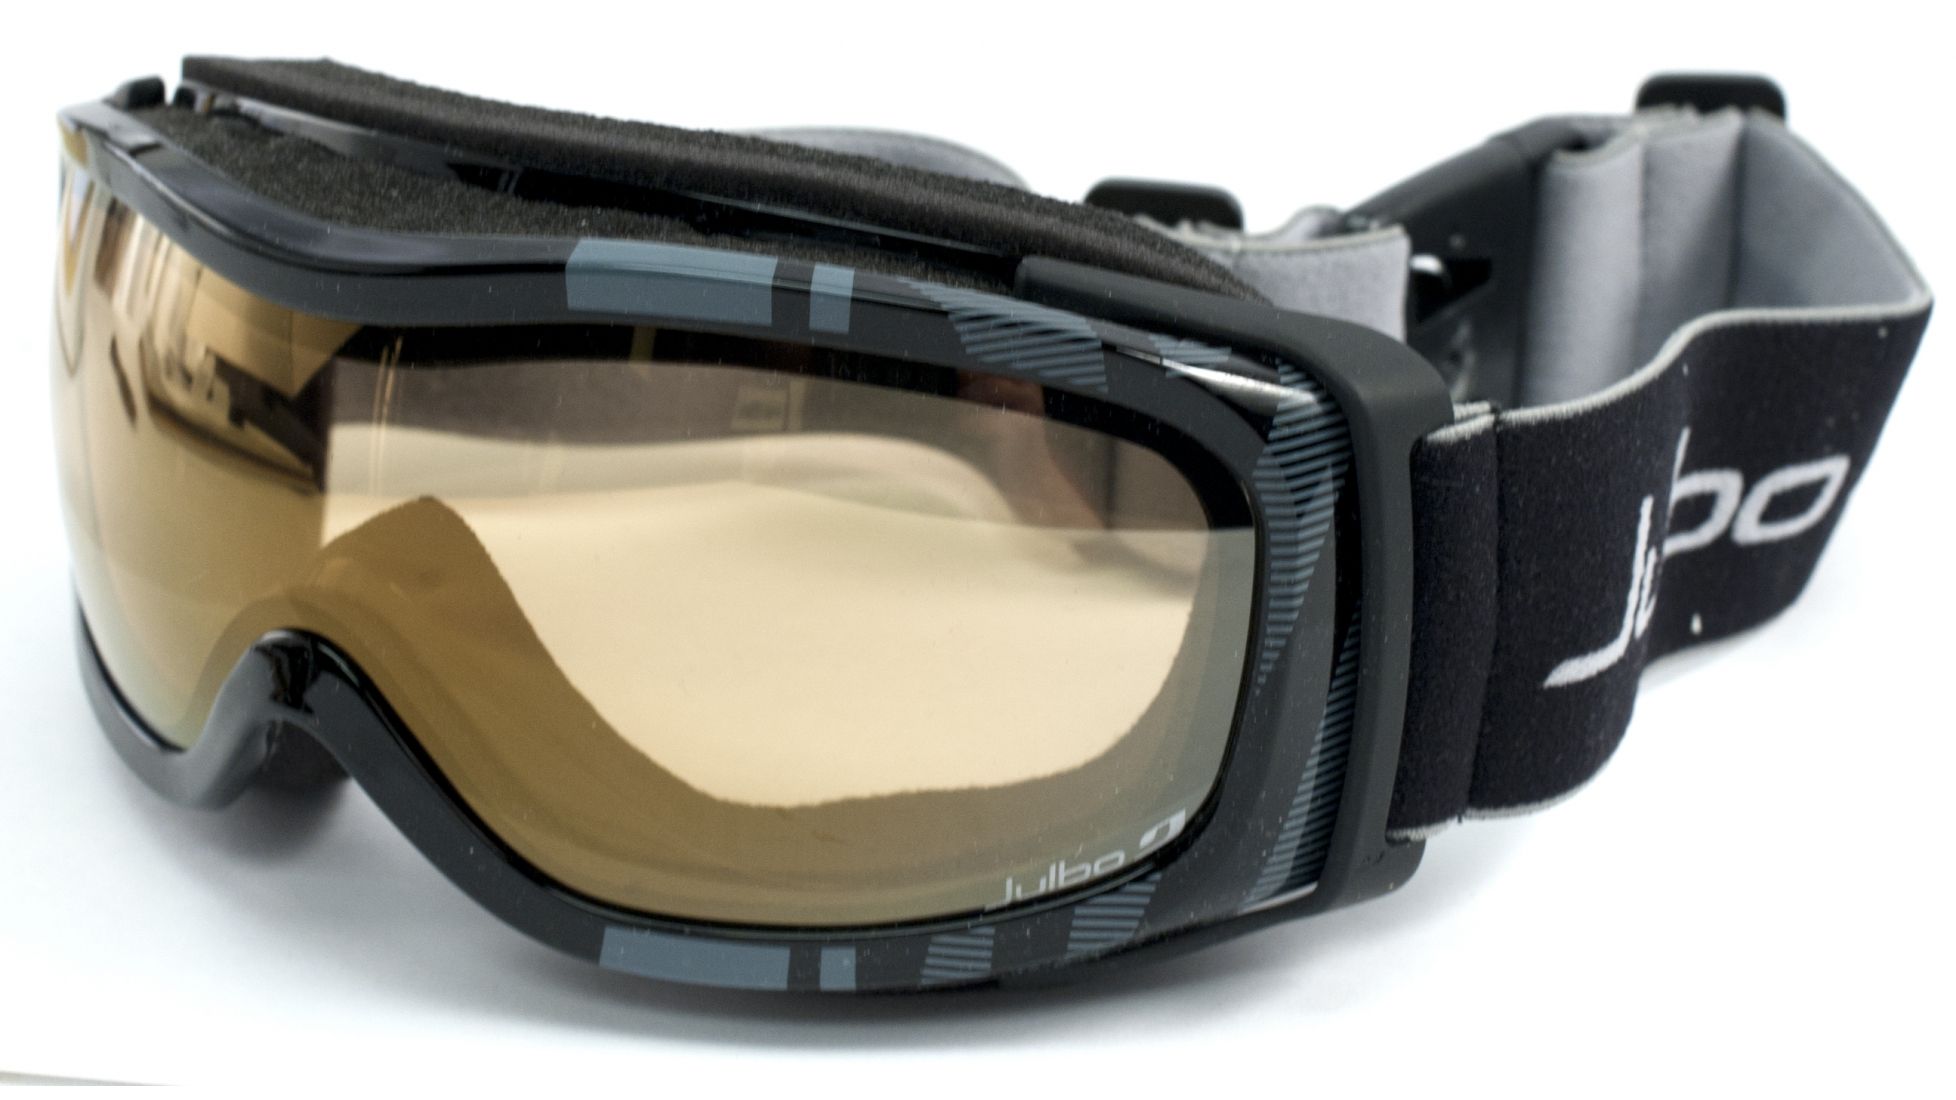 Julbo Eclipse Ski Goggles 5 Star Rating Free Shipping over 49!